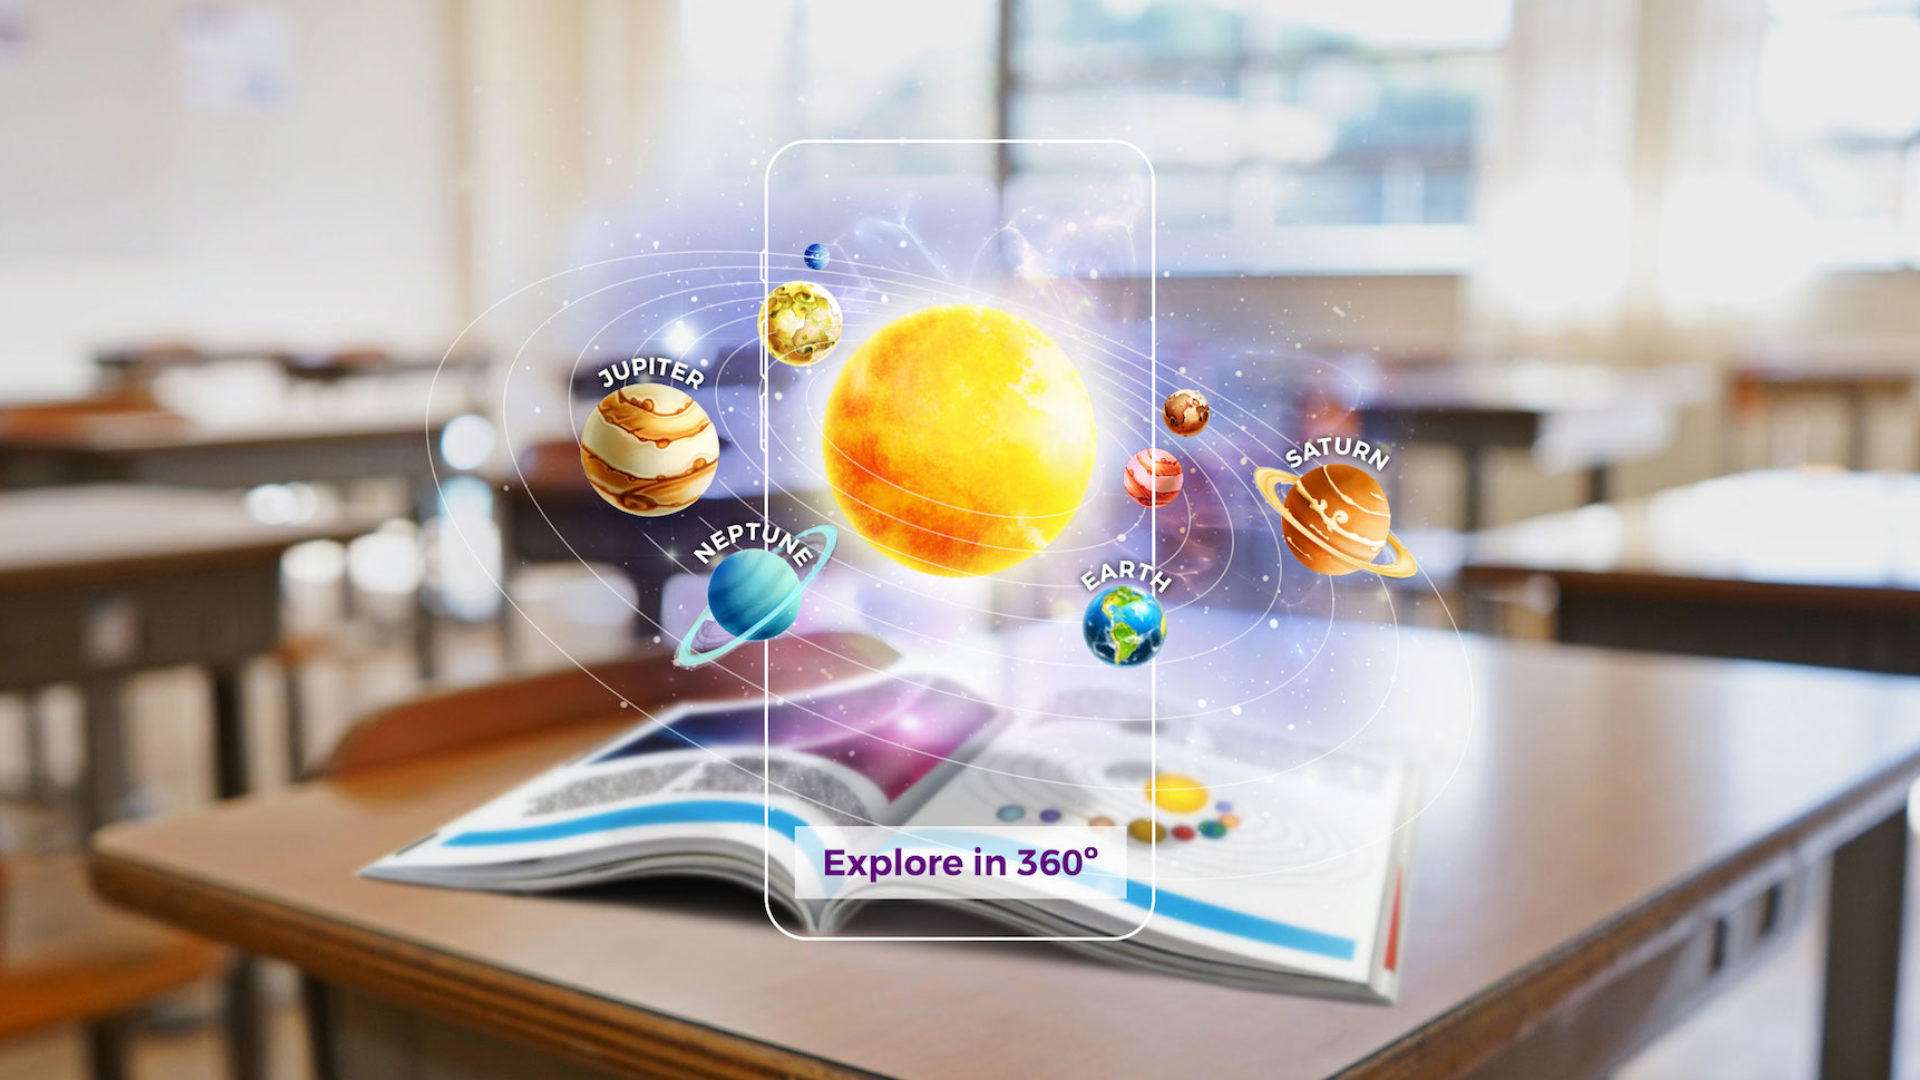 How is augmented reality in education?